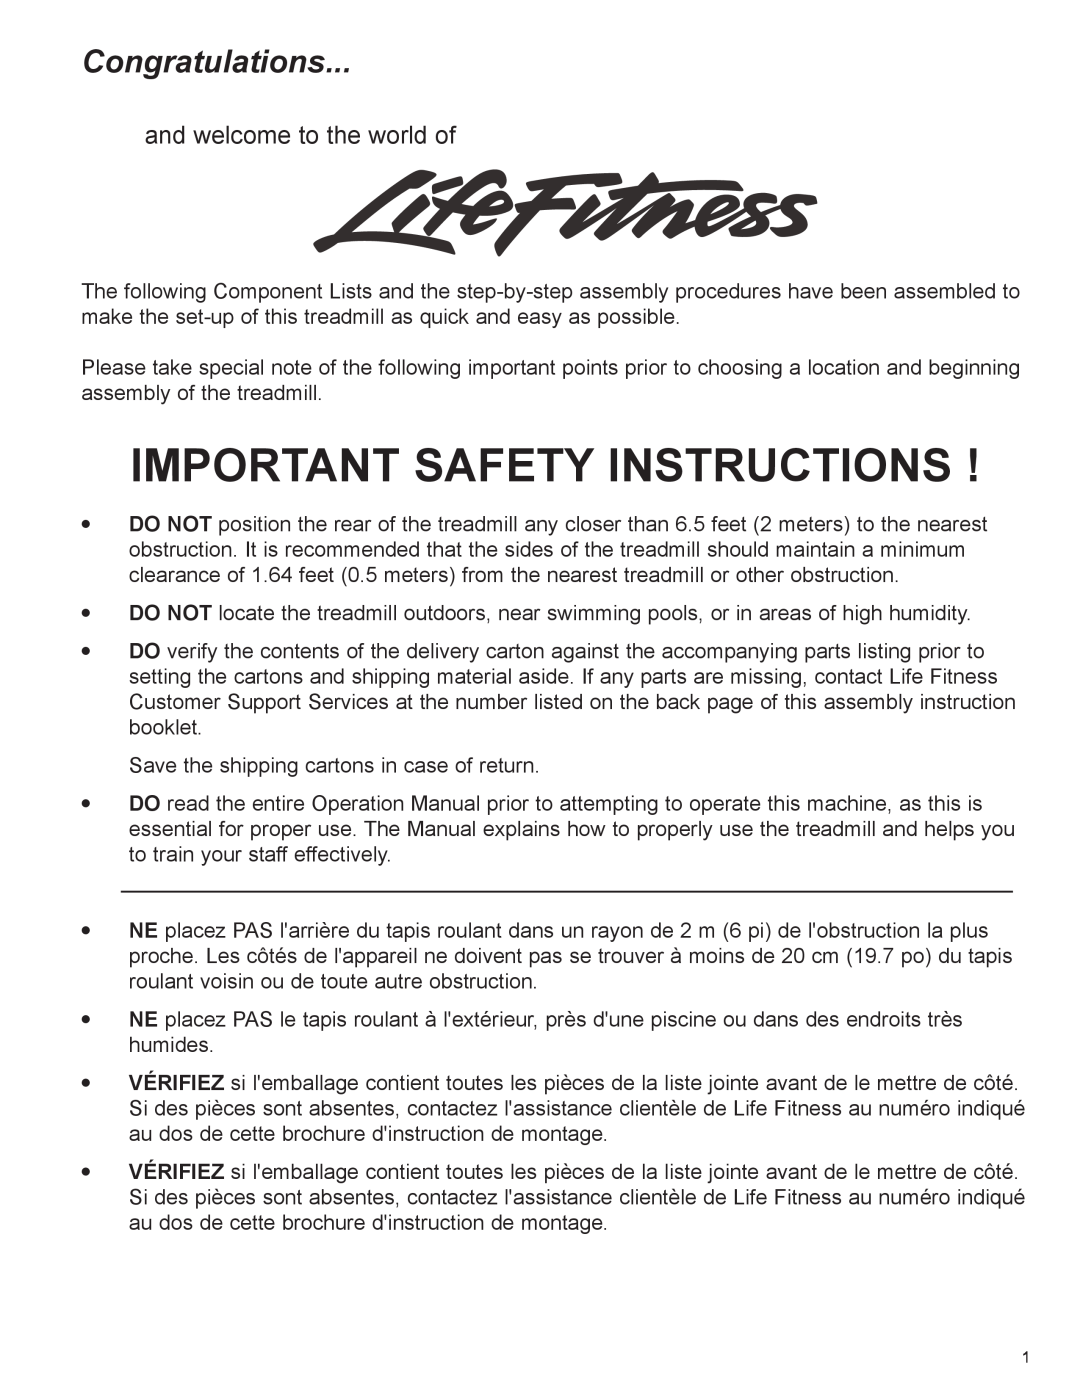 Life Fitness CLST, 97Ti manual Important Safety Instructions, Congratulations, and welcome to the world of 